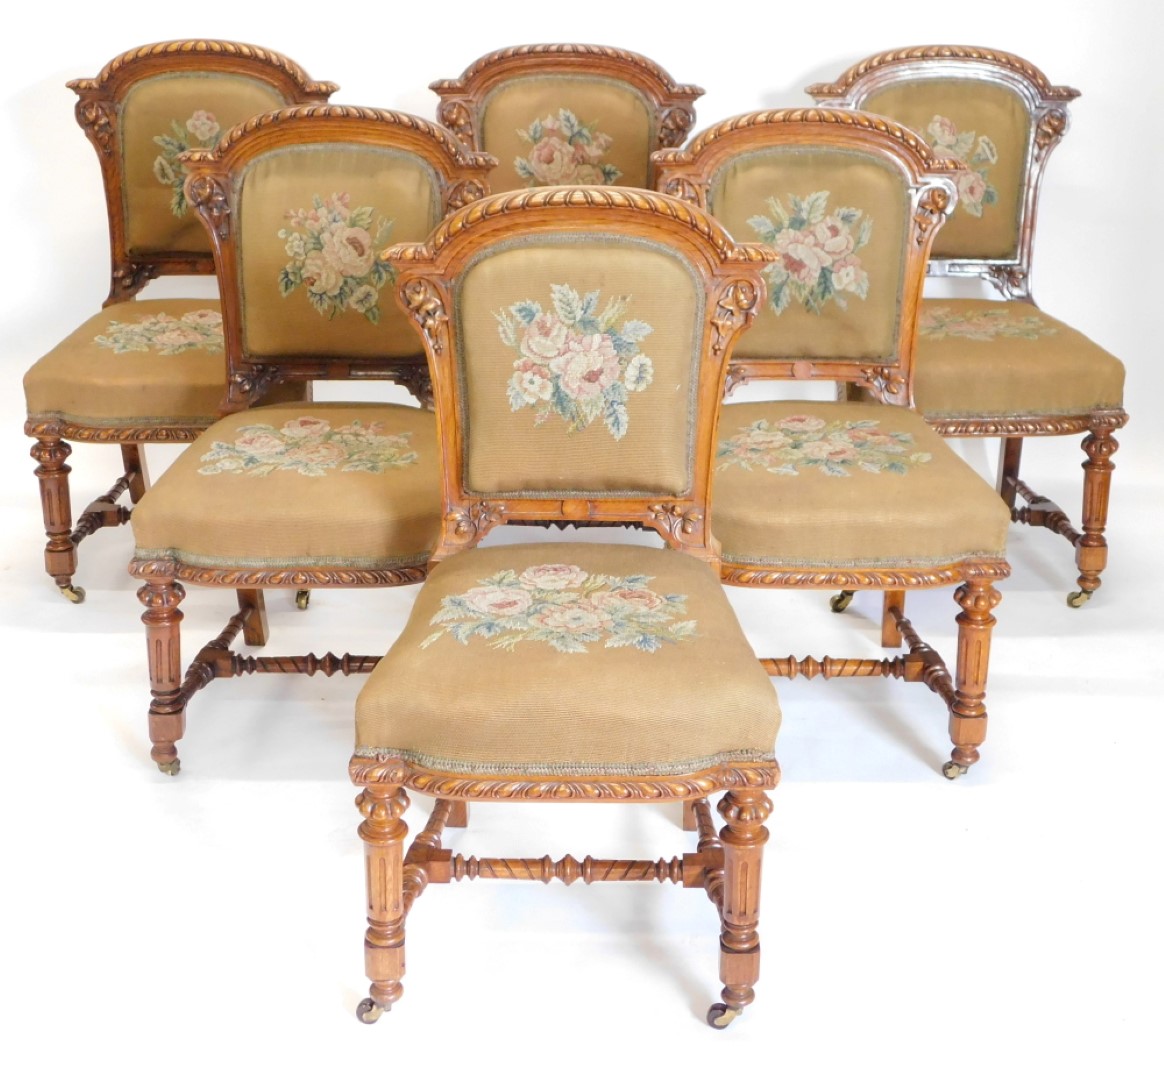 A set of fourteen Victorian elm and burr elm dining chairs, each with an arched gadrooned back with